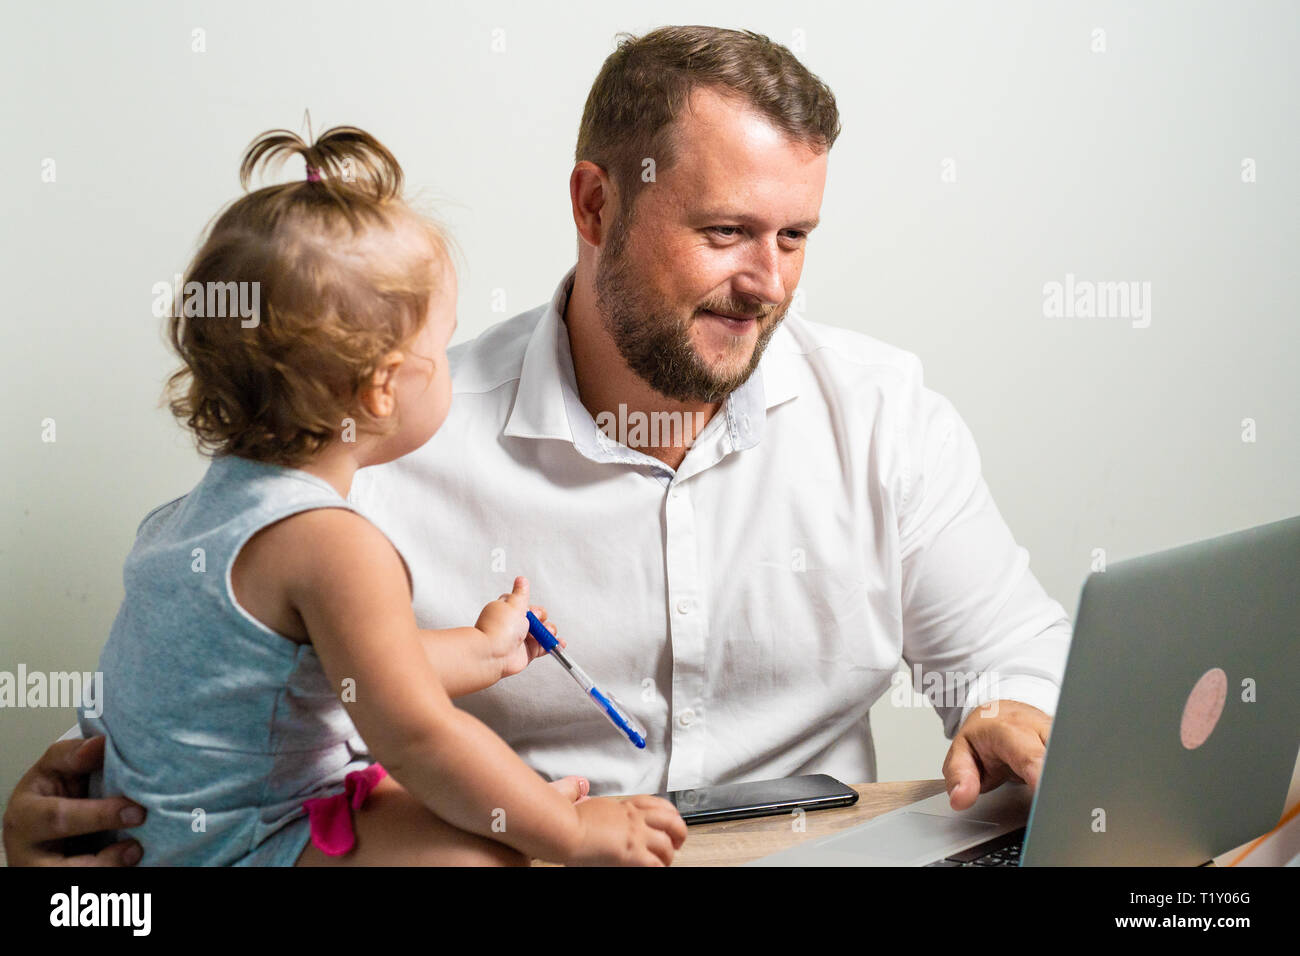 Daddy working. Папа на работе рикусок.